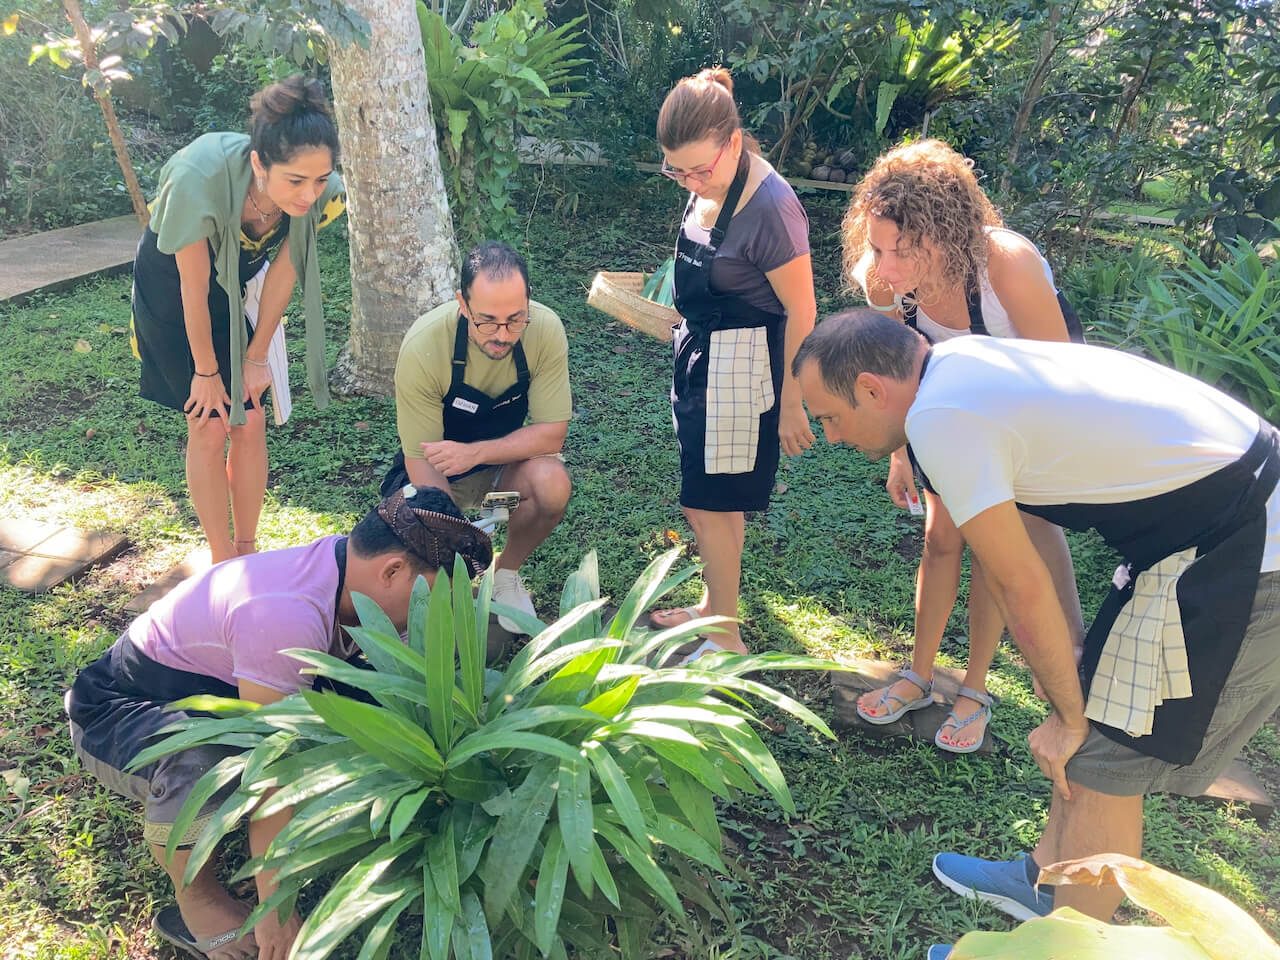 Picking pandan leaves with guests.